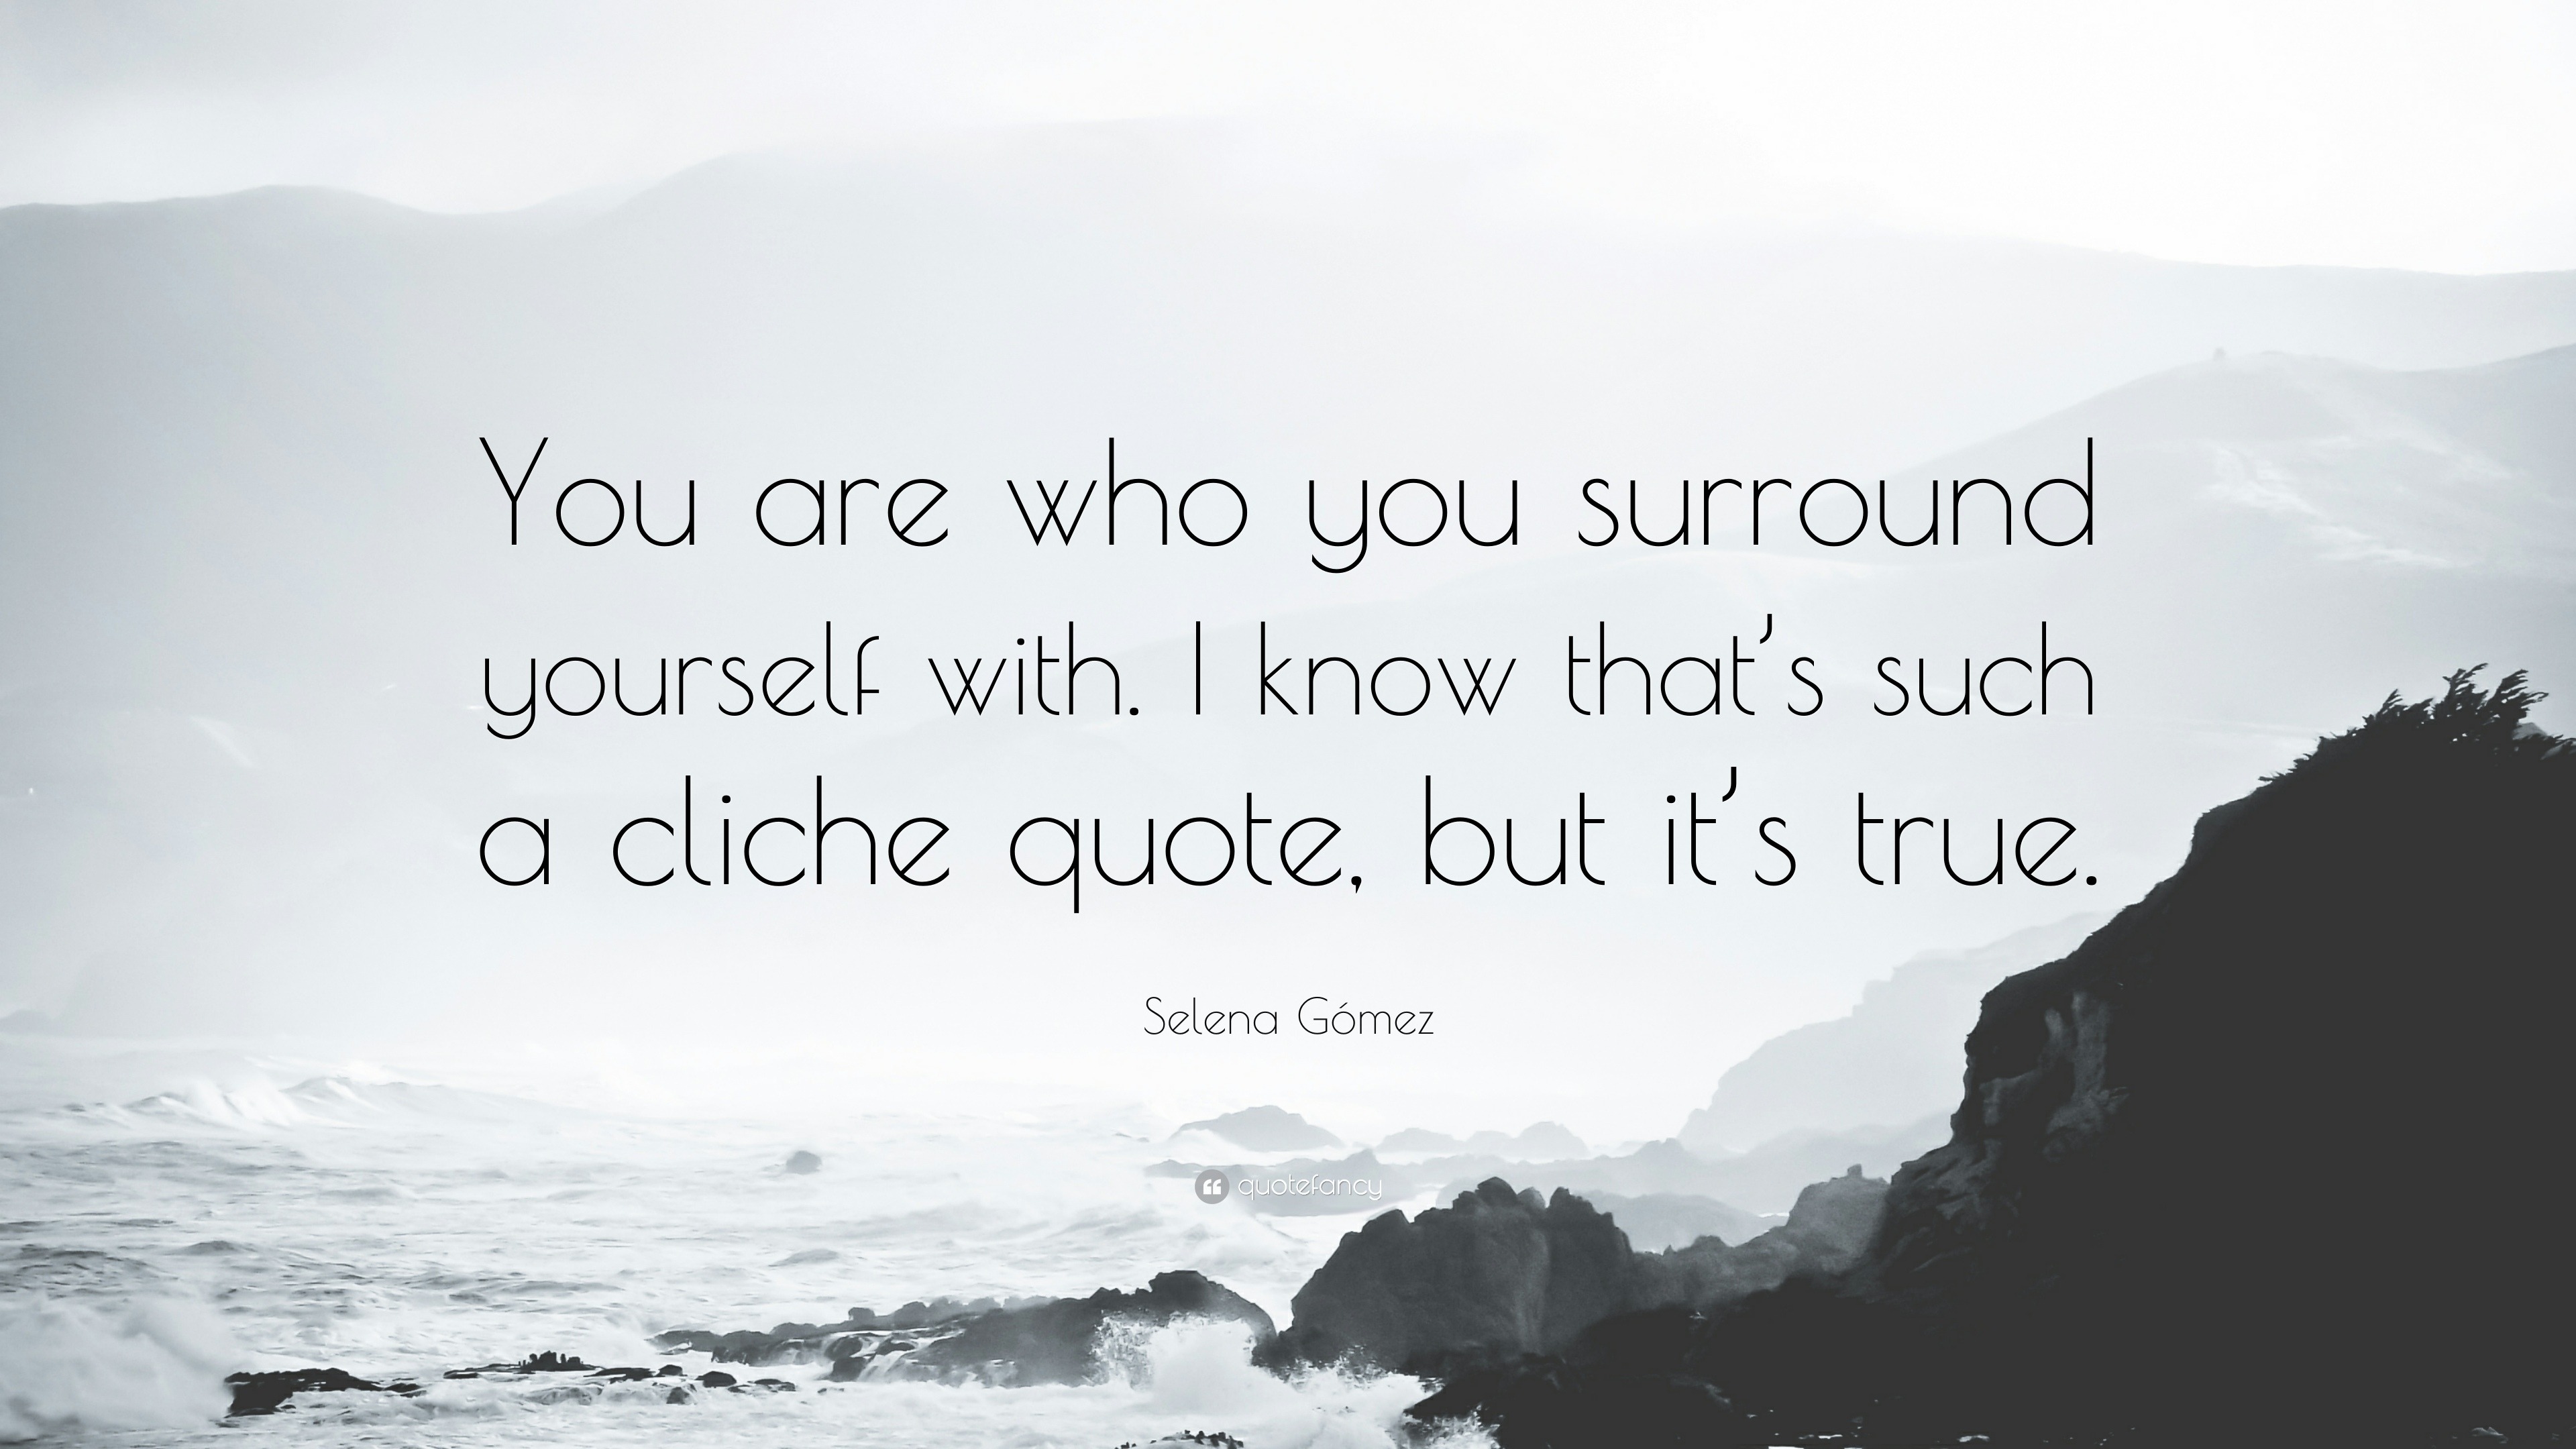 Selena Gómez Quote: “You are who you surround yourself with. I know